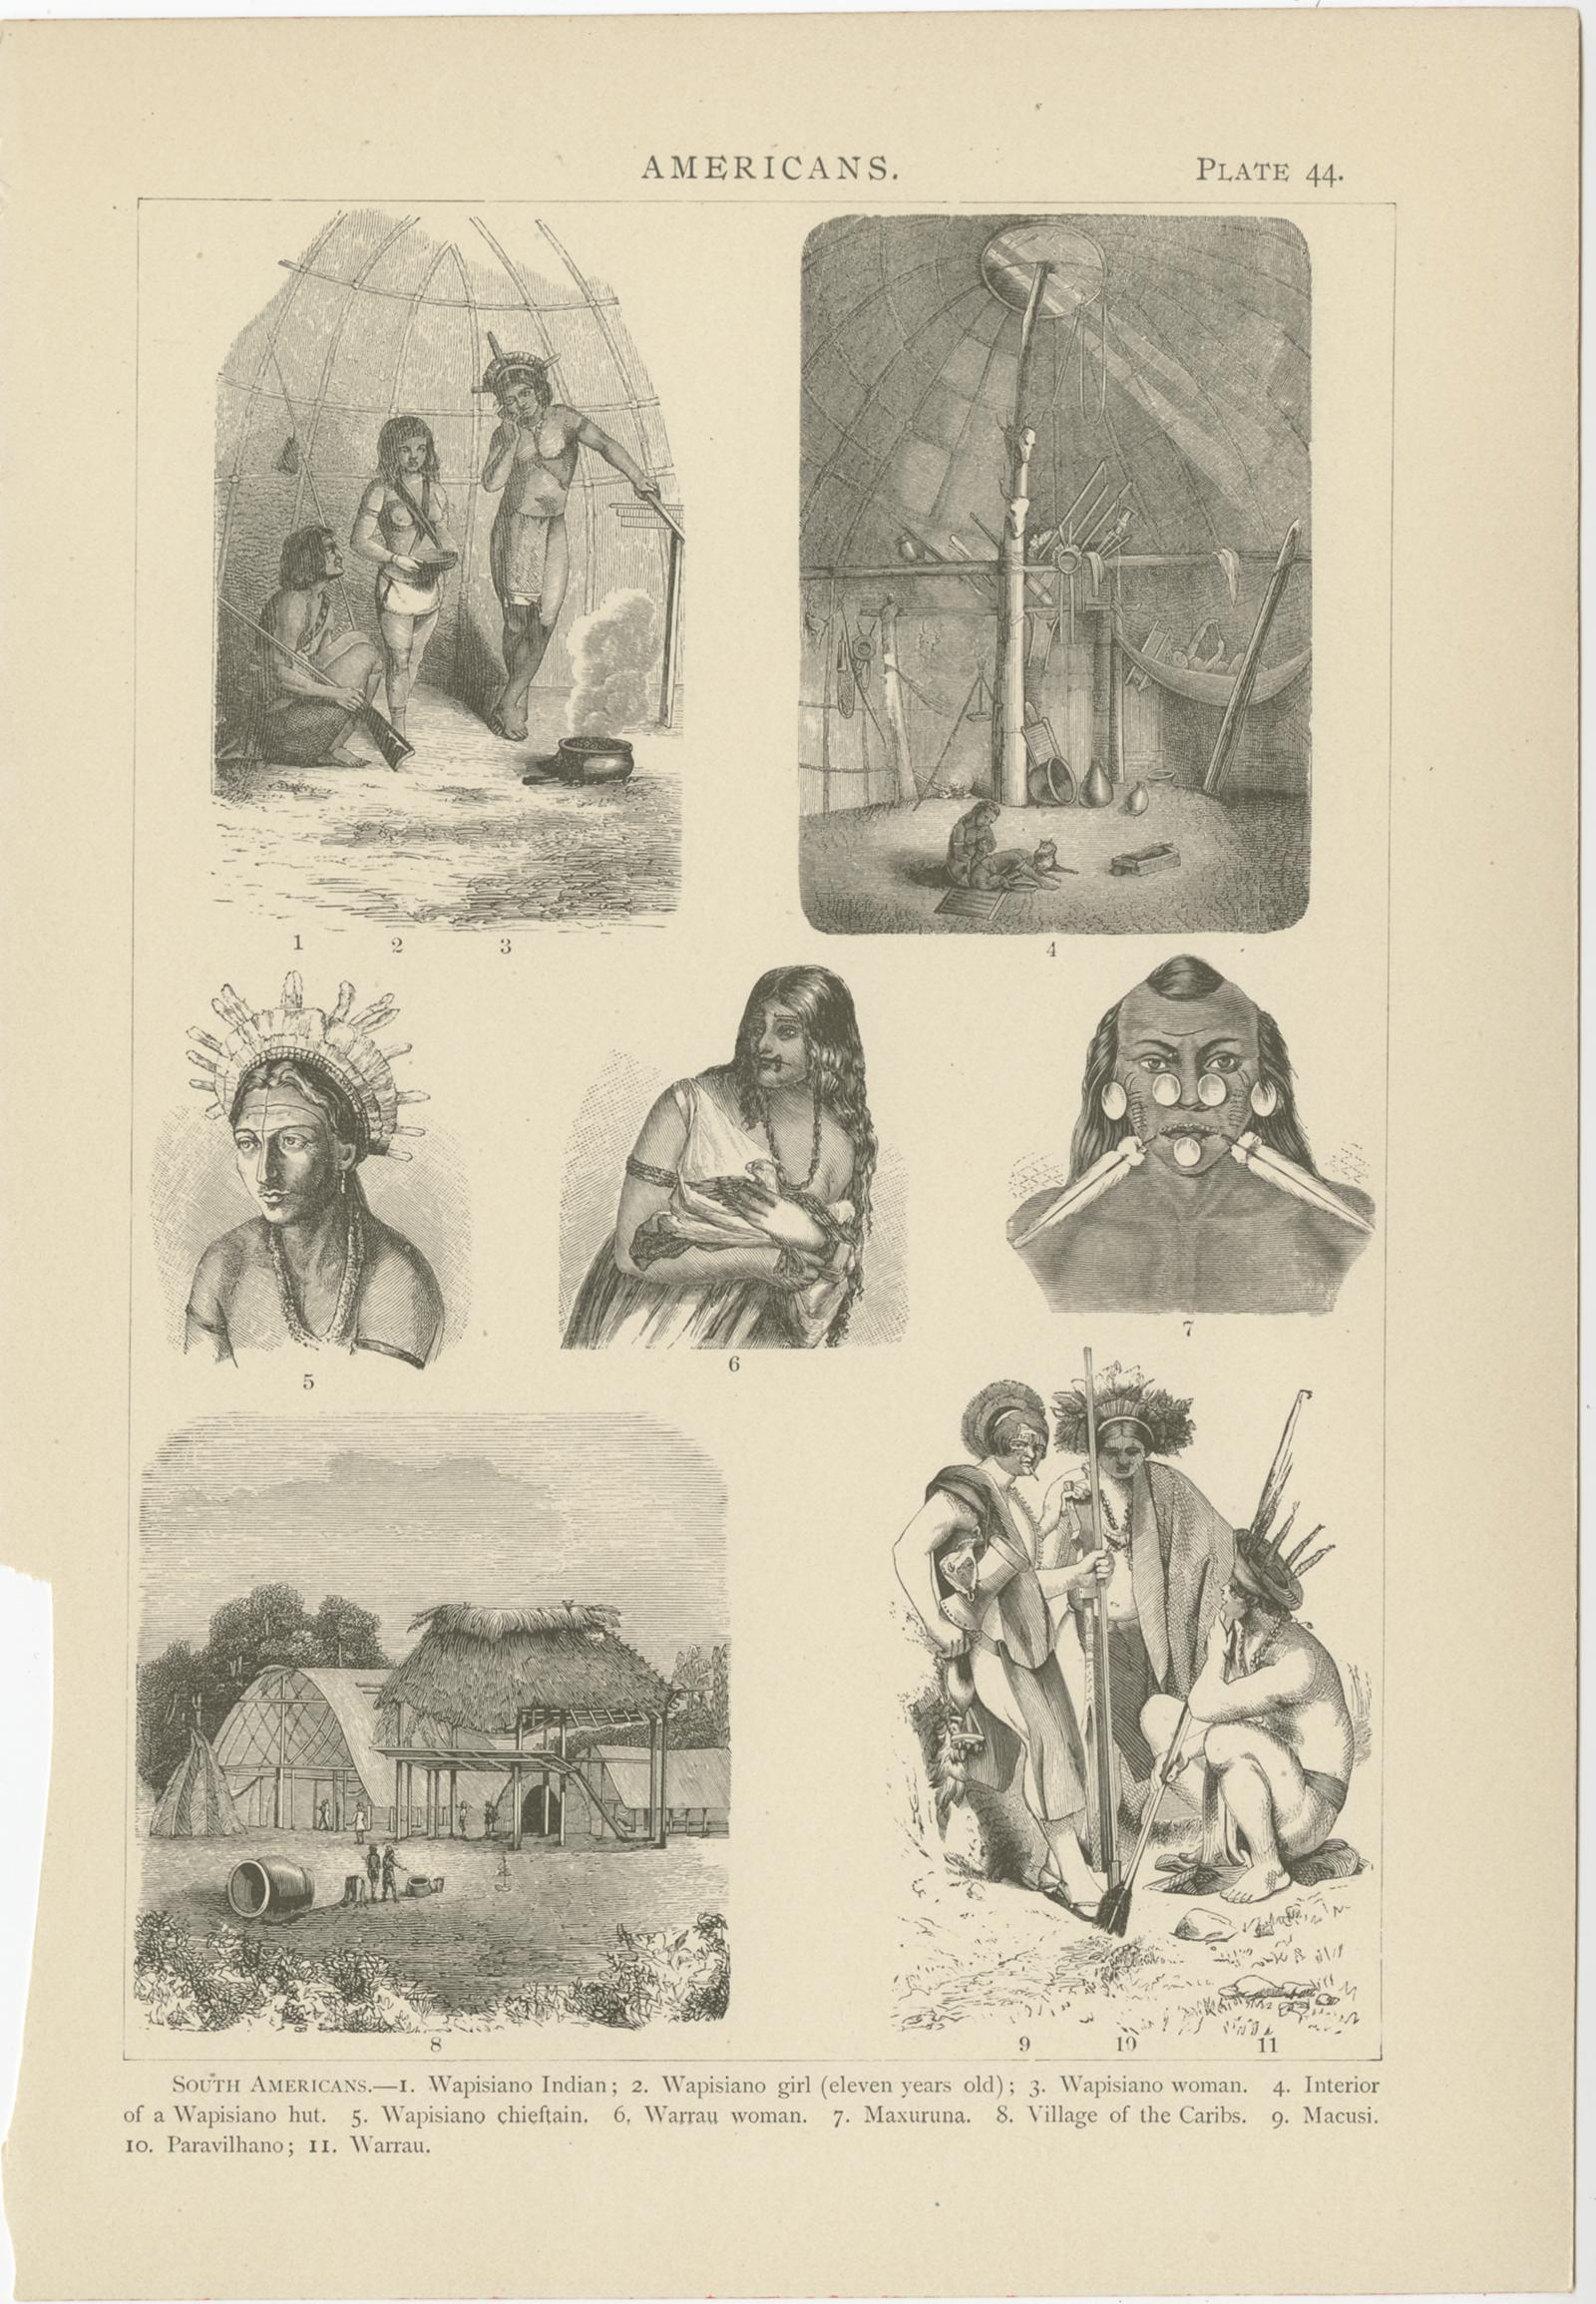 Set of 10 Antique Prints of Various Scenes, Figures and Objects of South America For Sale 1